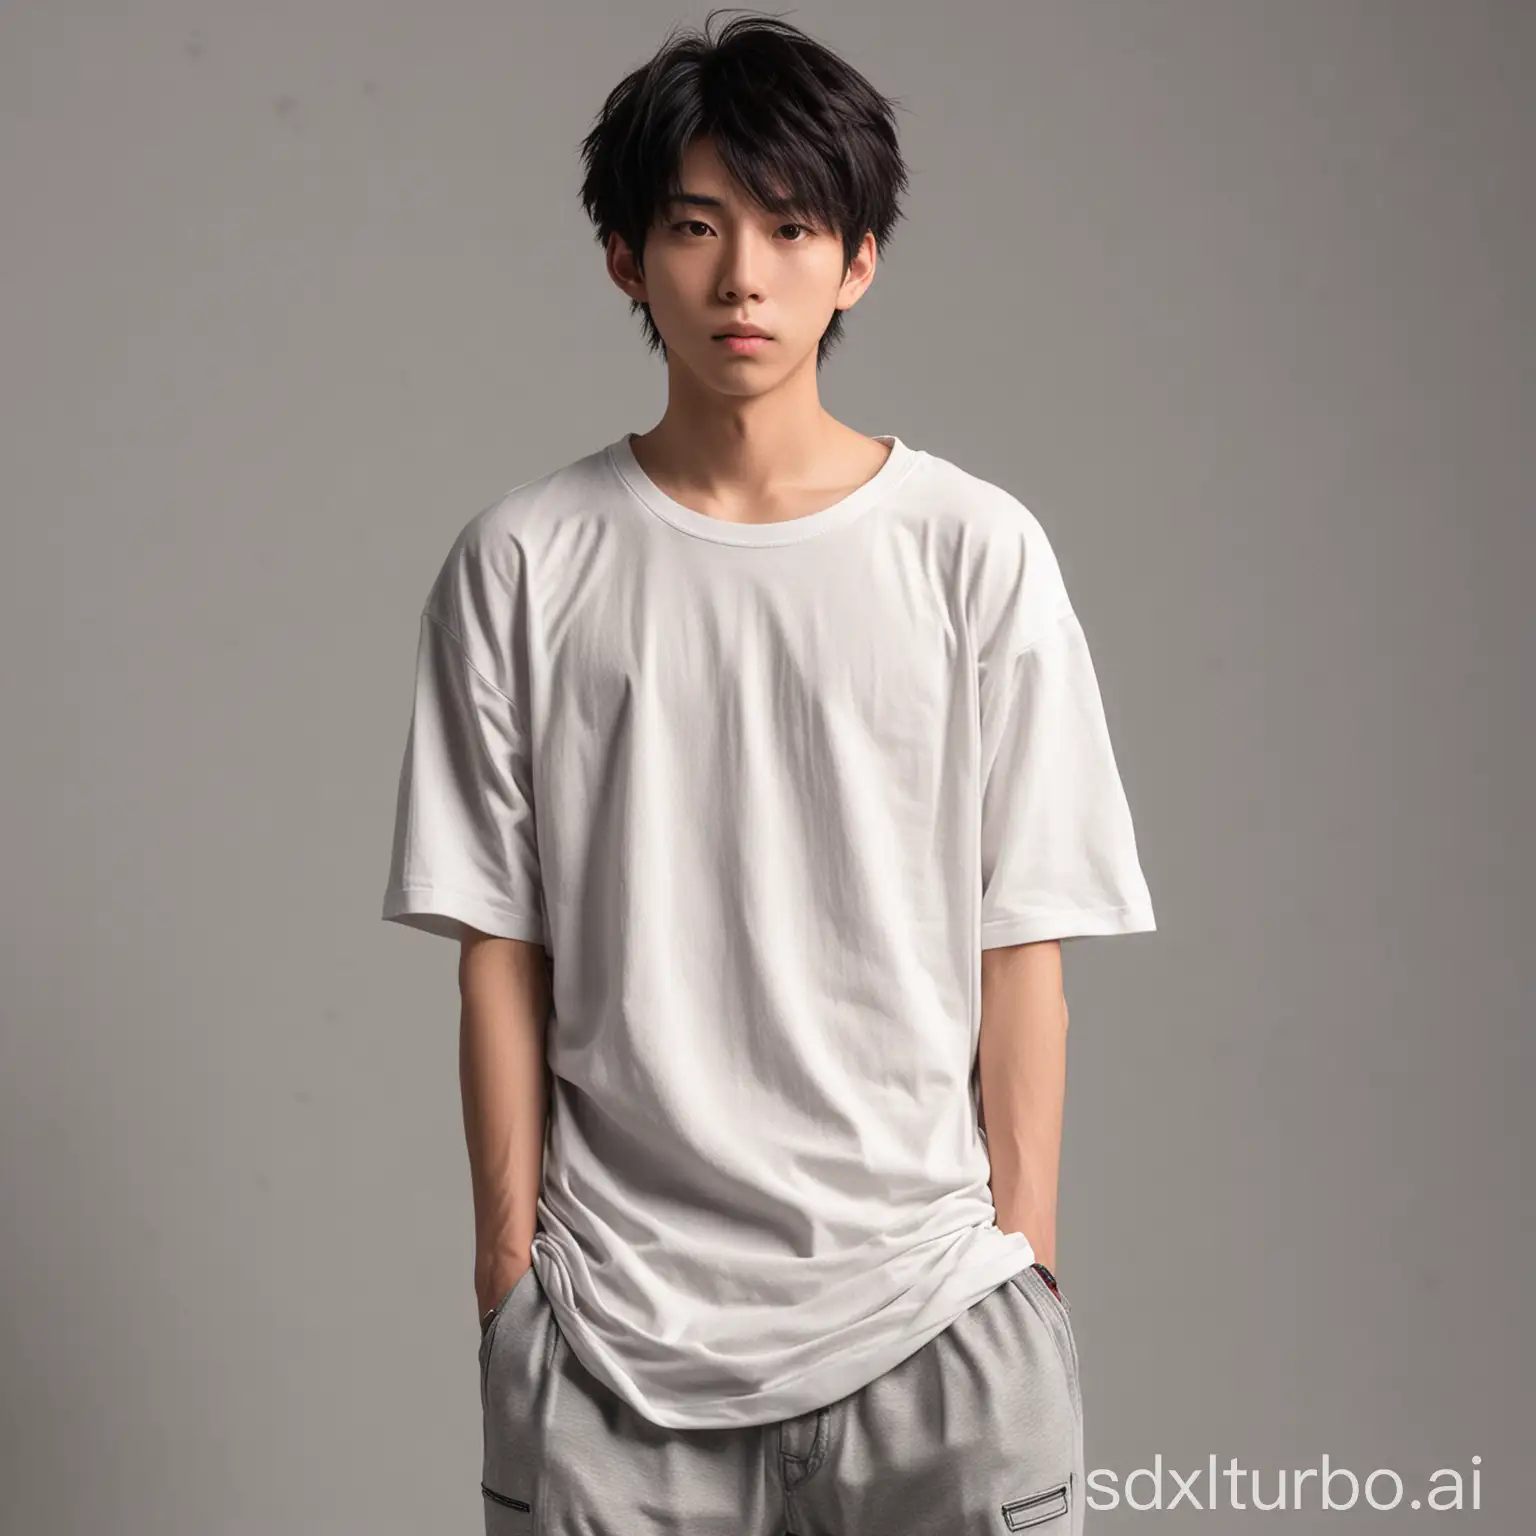 Athletic-Anime-Character-Modeling-in-Oversized-Tshirt